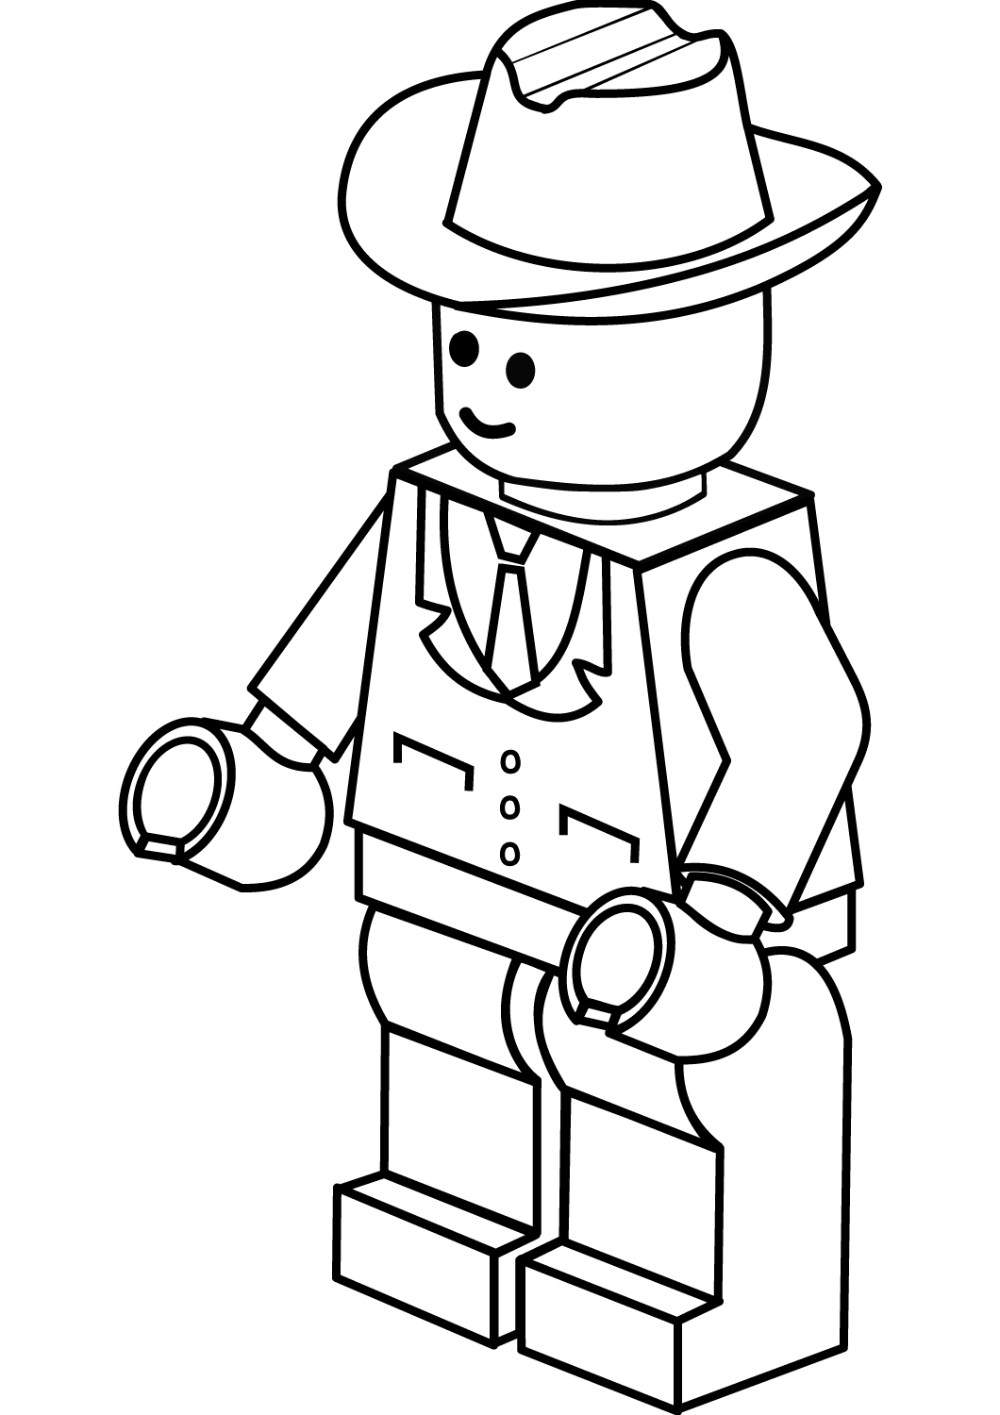 Lego man coloring page free lego coloring pages lego coloring super coloring pages